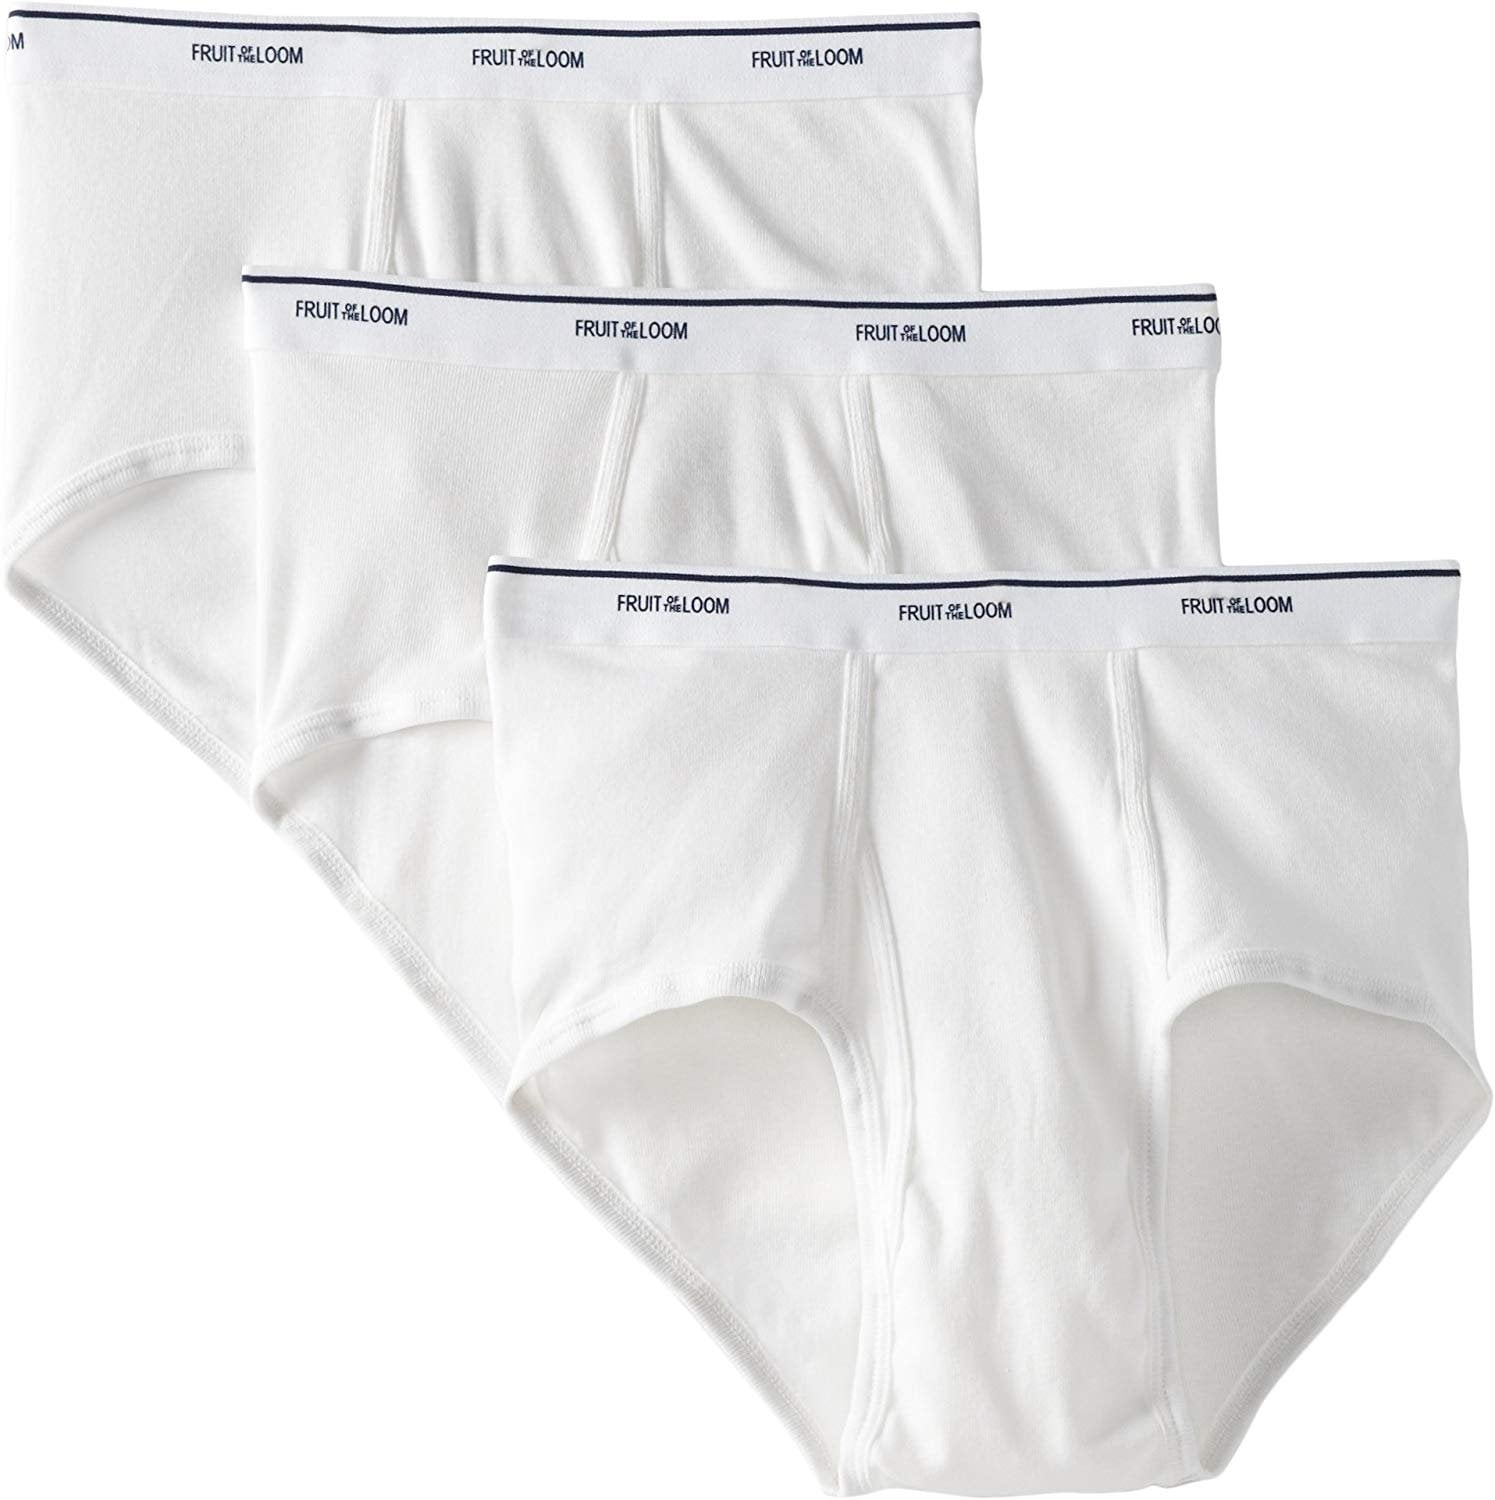 Fruit of the Loom Men's 100% Cotton Tagr Free White Classic Briefs, 3 Pack  